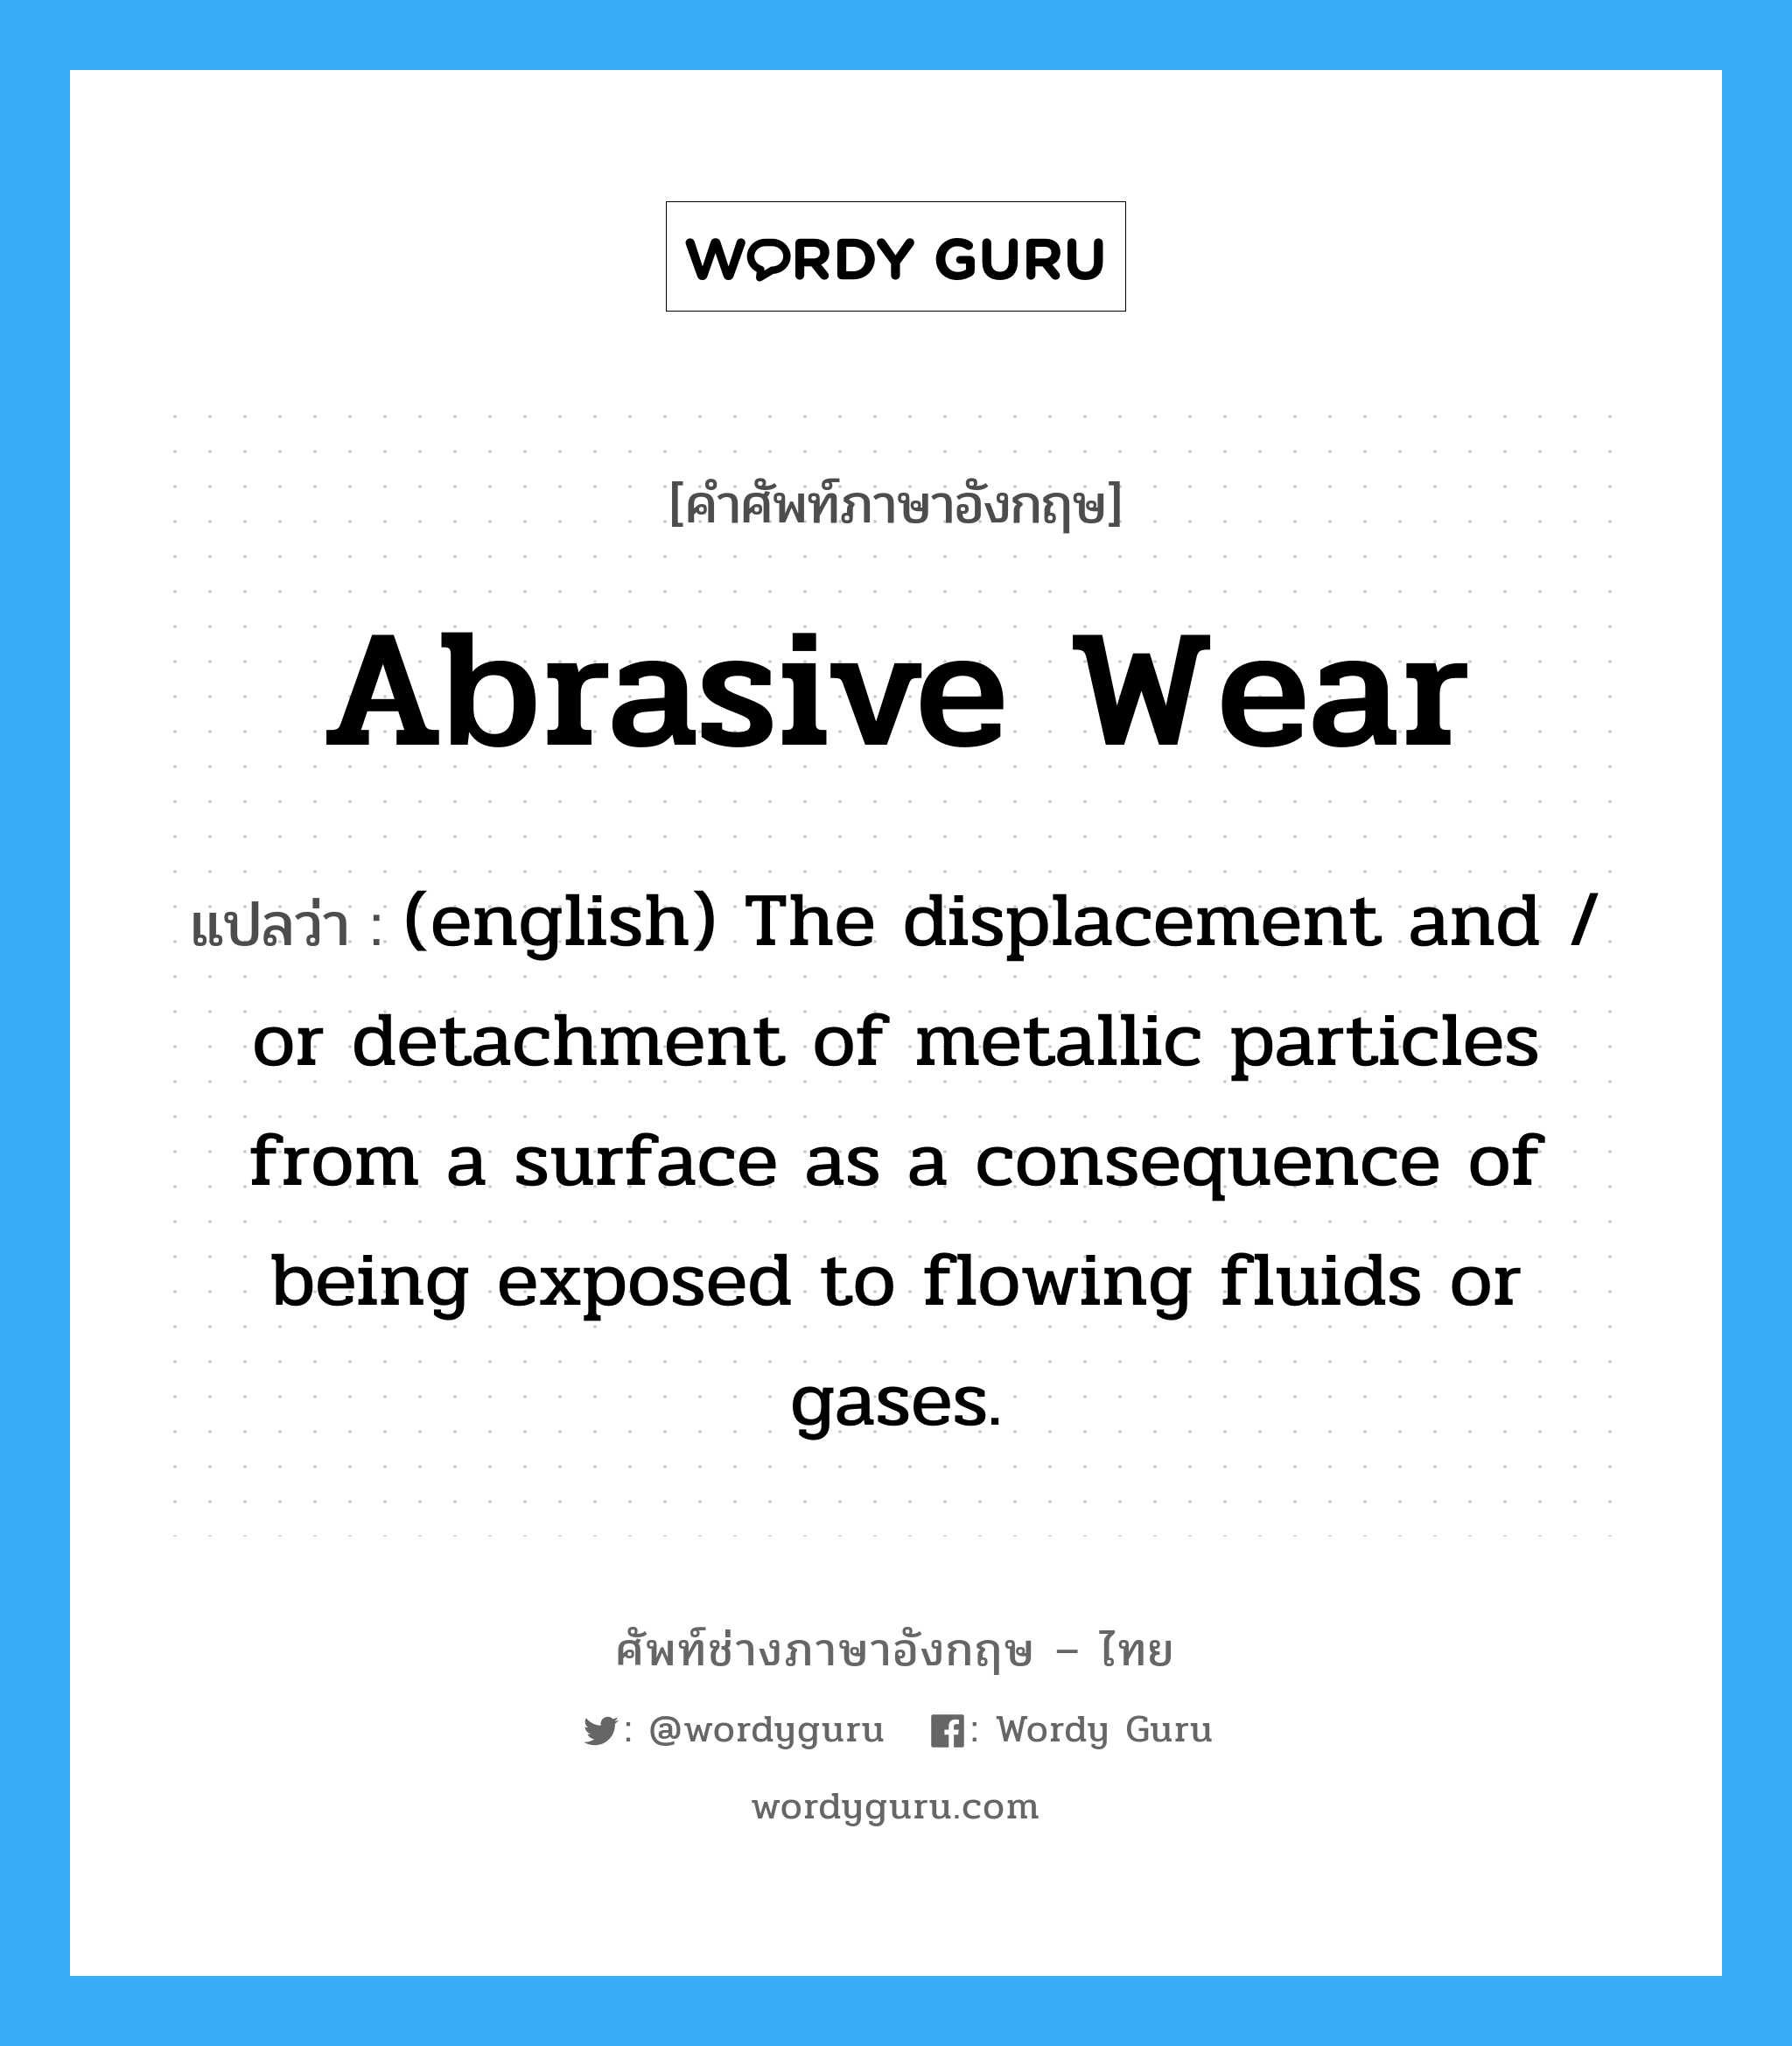 (english) The displacement and/or detachment of metallic particles from a surface as a consequence of being exposed to flowing solids, fluids or gases. The process of rubbing, grinding, or wearing away by friction. ภาษาอังกฤษ?, คำศัพท์ช่างภาษาอังกฤษ - ไทย (english) The displacement and / or detachment of metallic particles from a surface as a consequence of being exposed to flowing fluids or gases. คำศัพท์ภาษาอังกฤษ (english) The displacement and / or detachment of metallic particles from a surface as a consequence of being exposed to flowing fluids or gases. แปลว่า Abrasive Wear